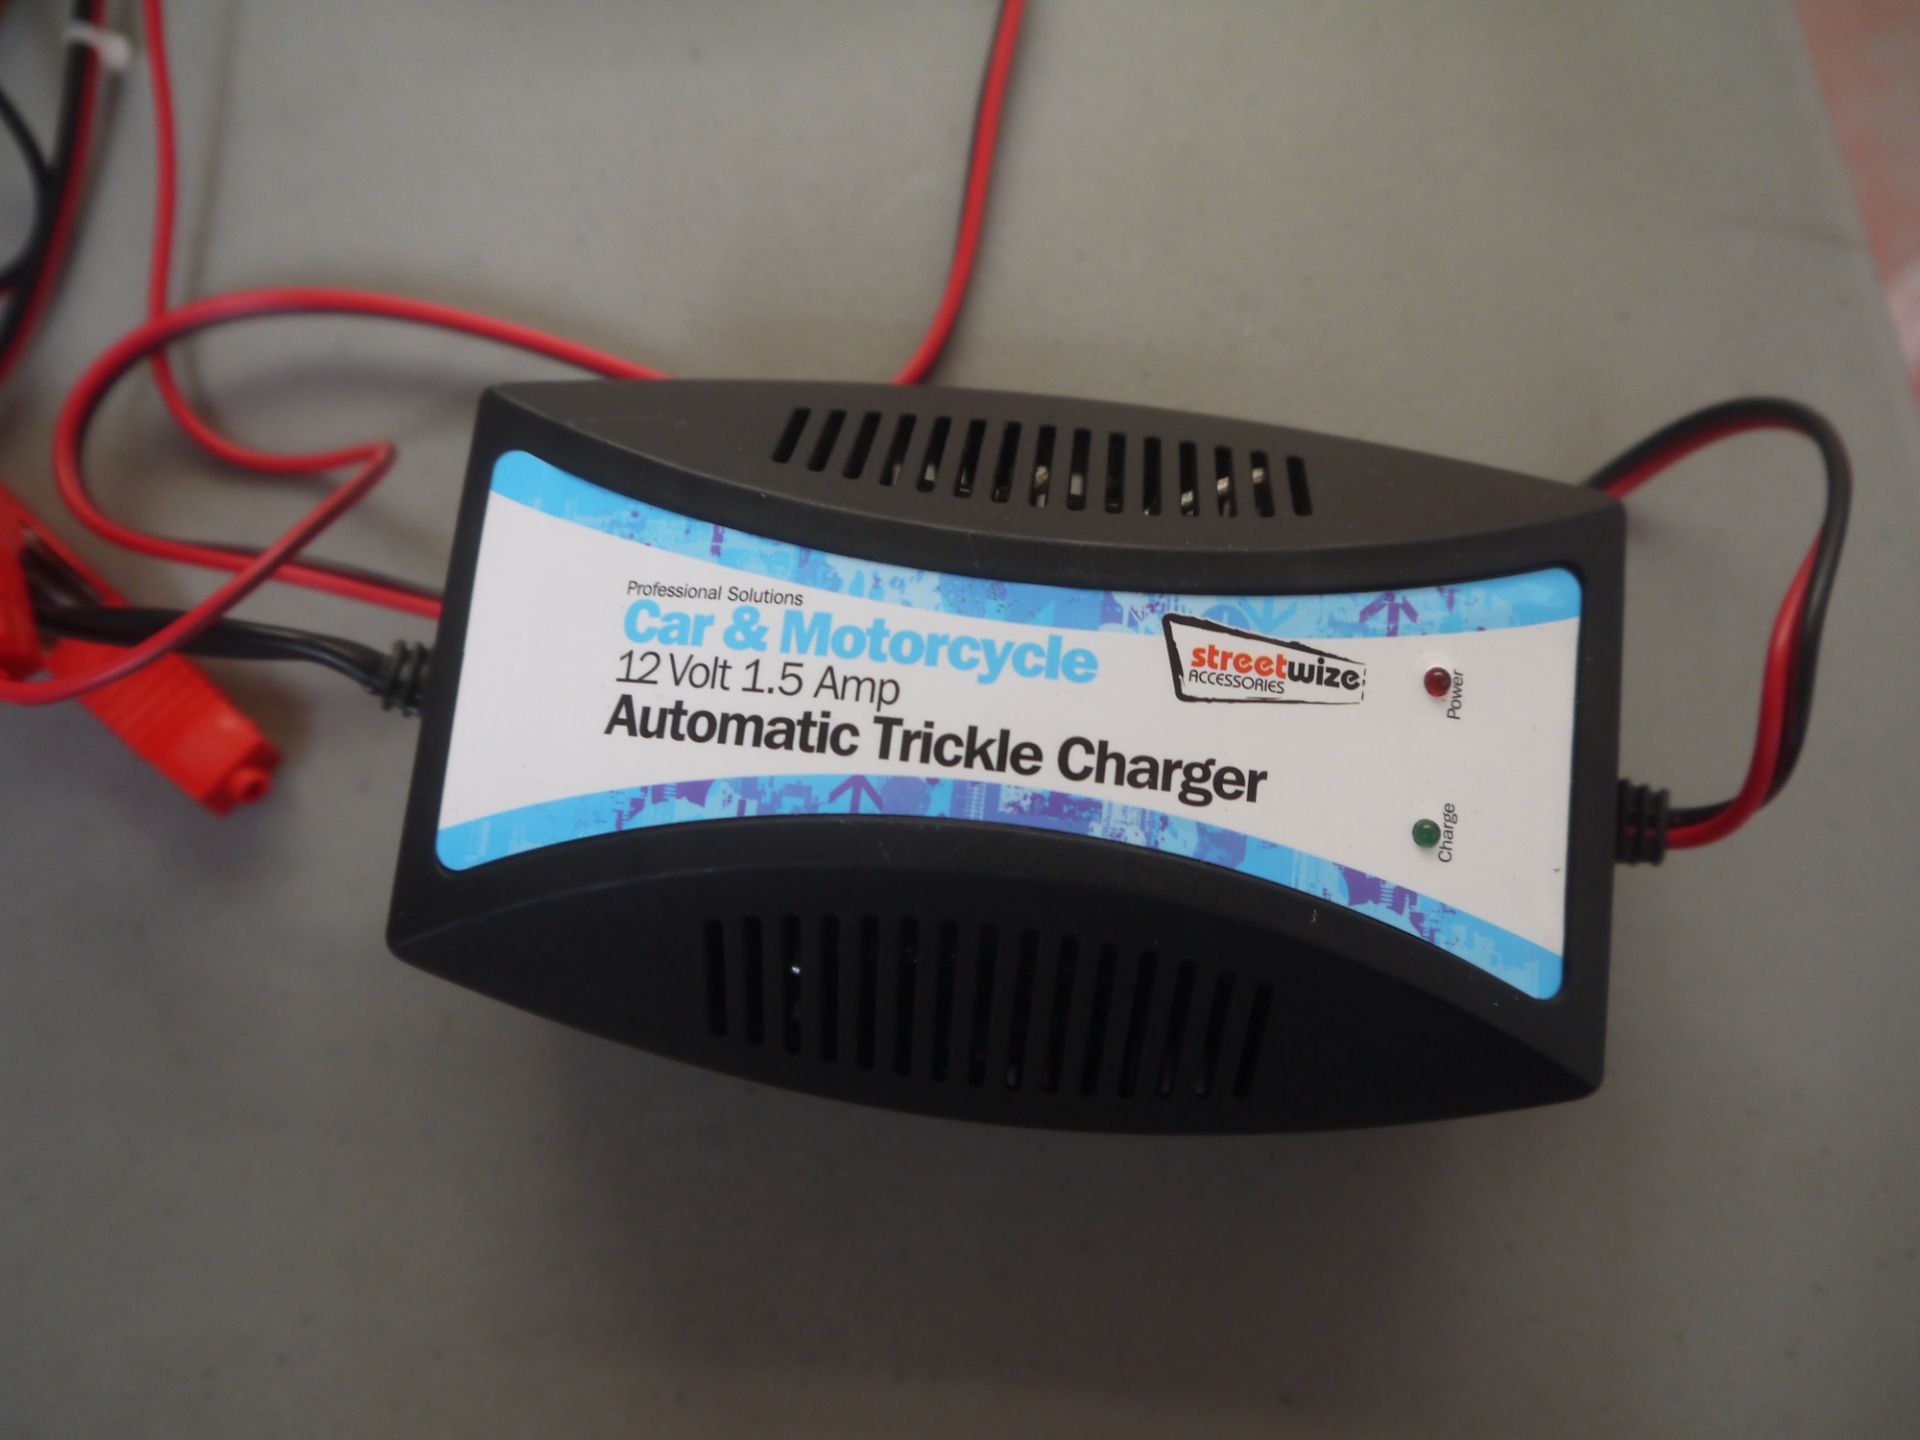 4x StreetWize Car & Motorcycle 12V 1.5Amp Automatic Trickle Charger. Boxed.